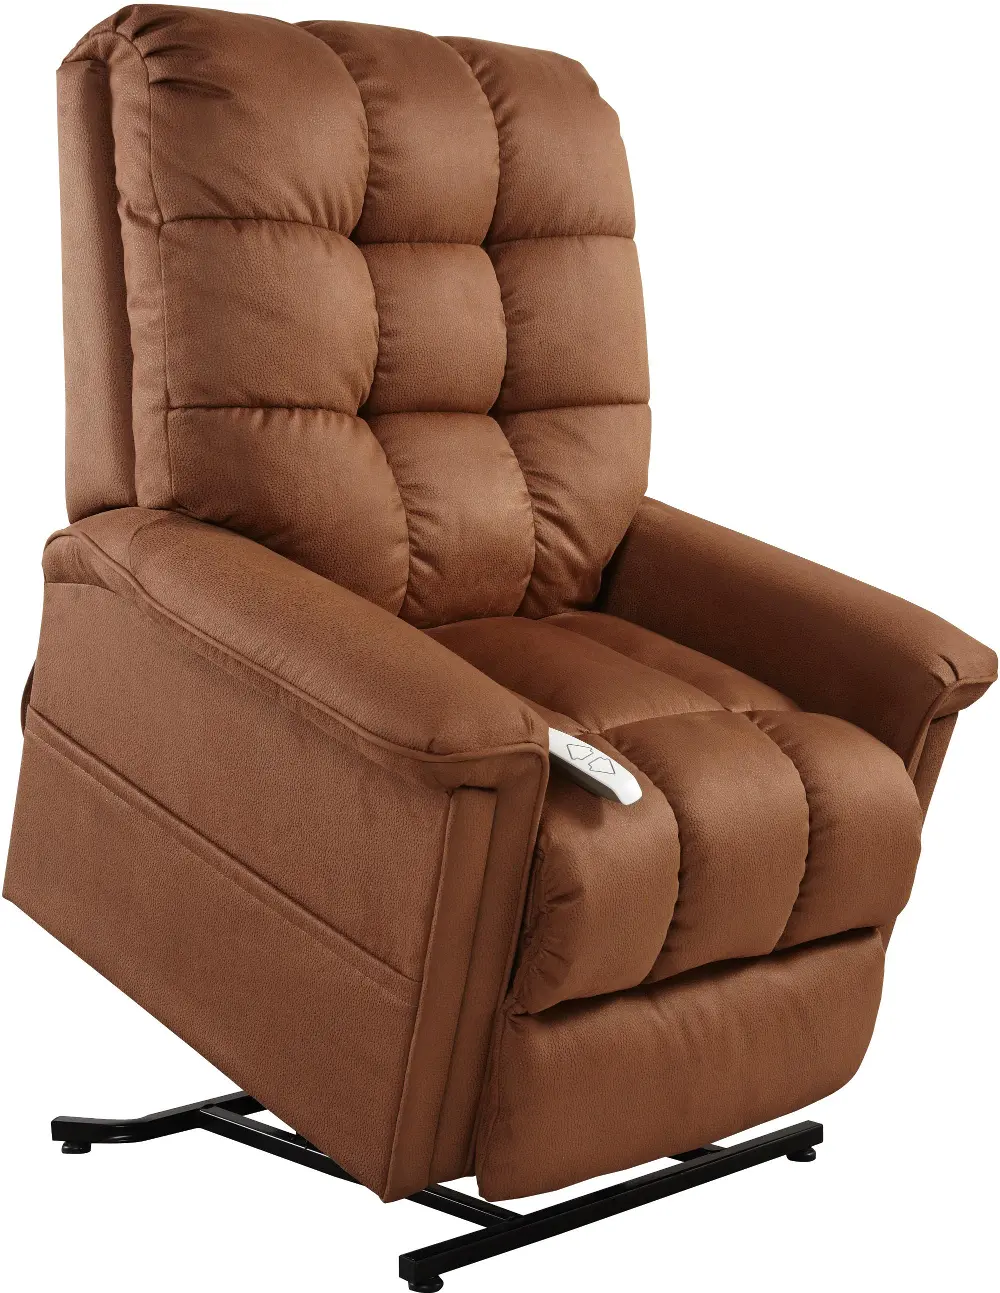 Rust Power Recliner With Lift Option-1